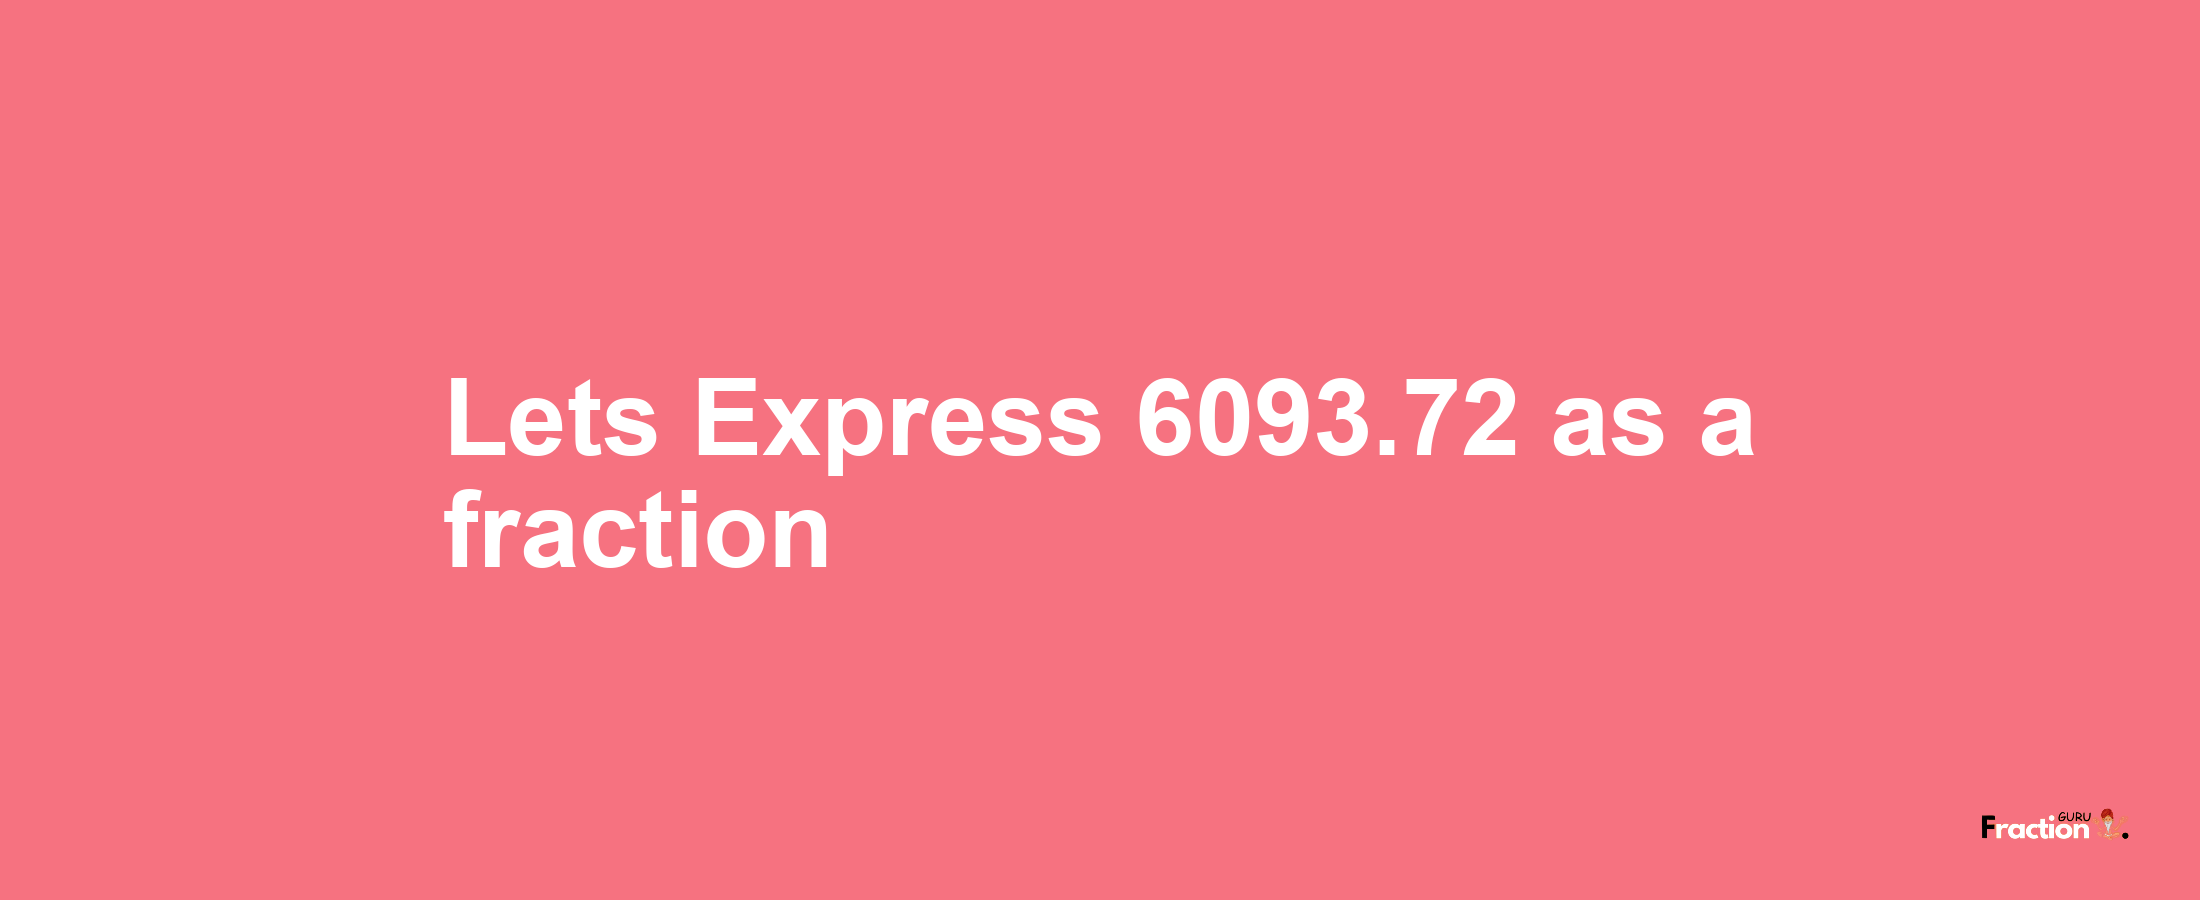 Lets Express 6093.72 as afraction